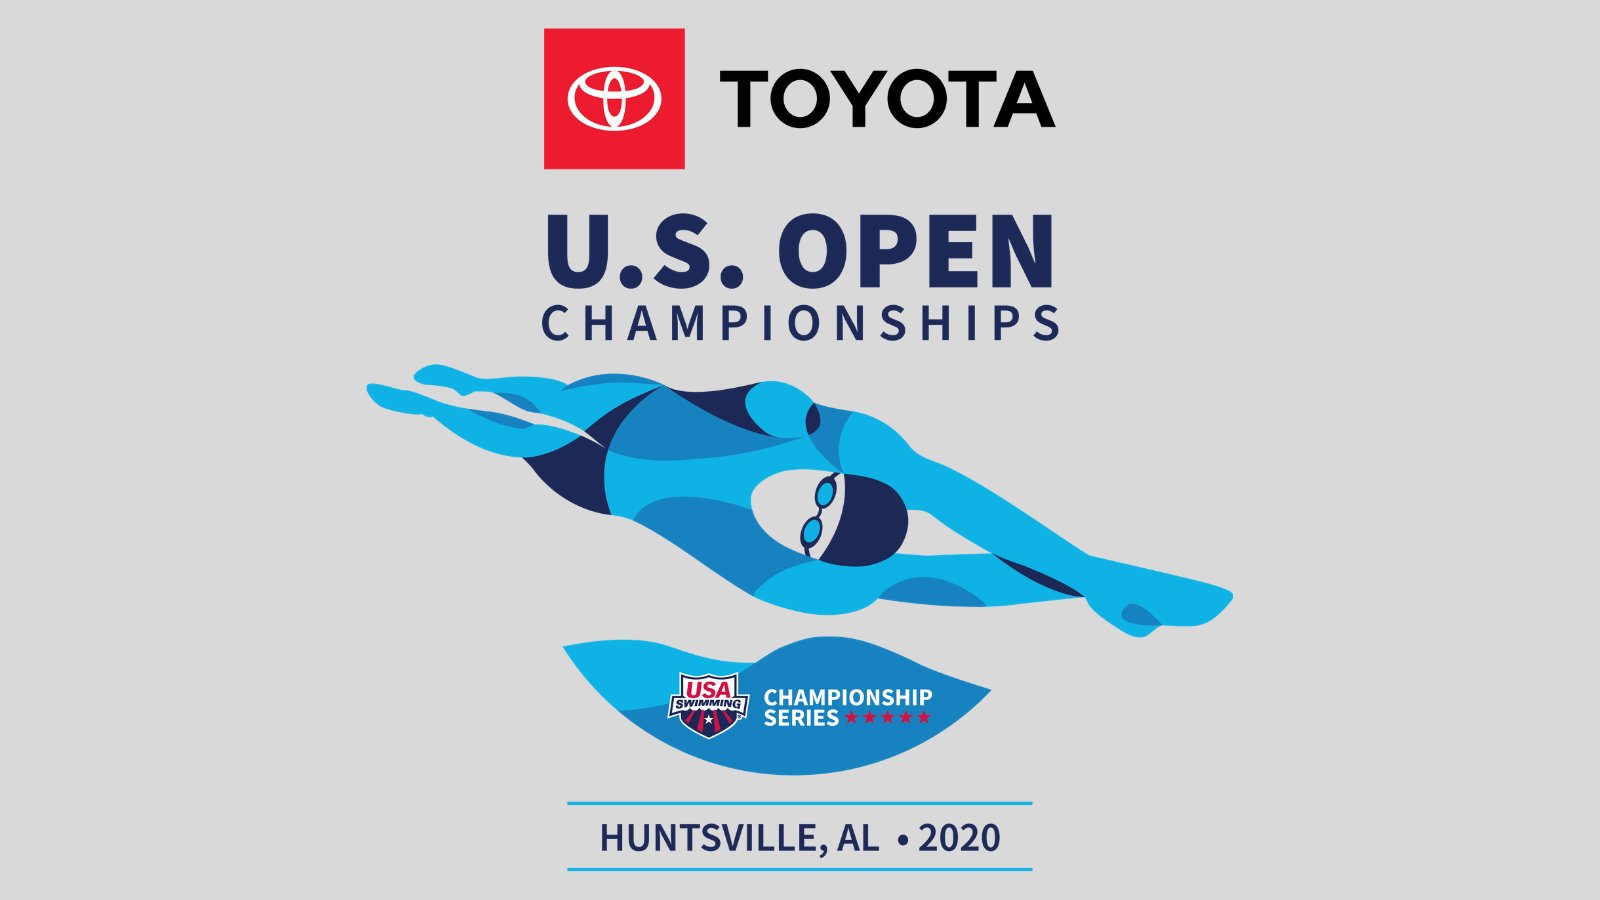 Toyota U.S. Open to Take Place at the Huntsville Aquatic Center